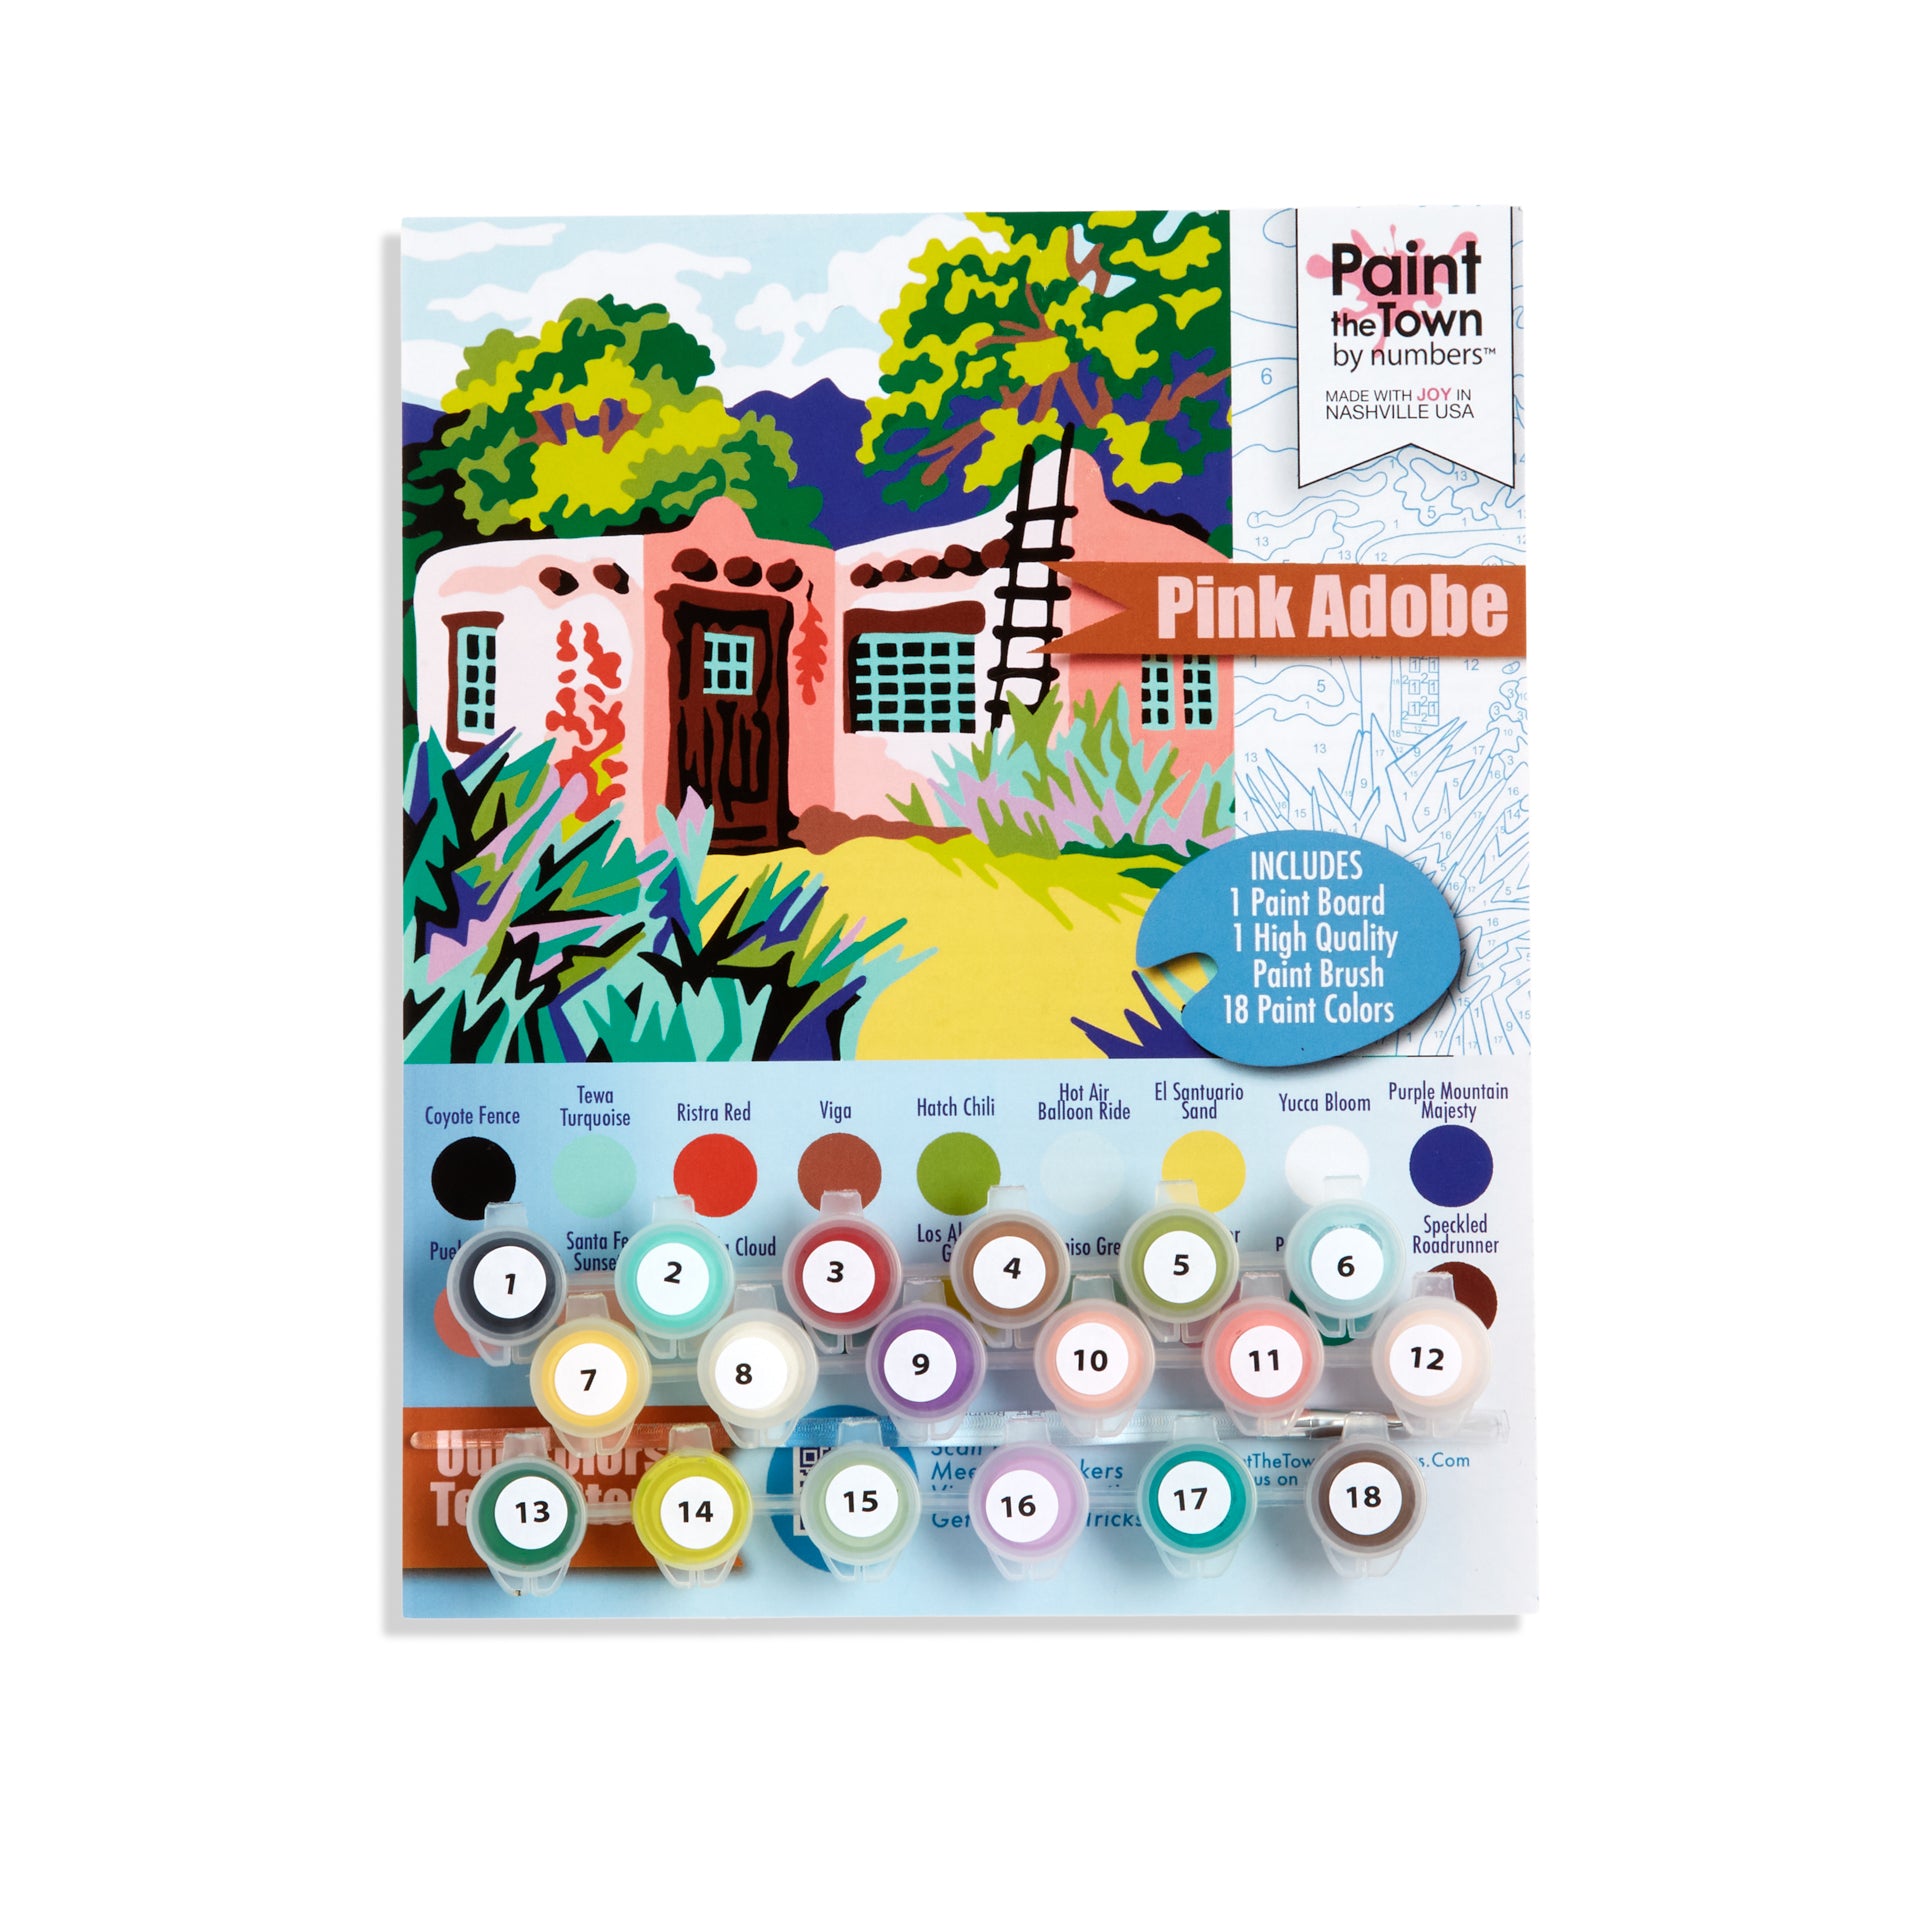 Pink Adobe Paint by Number Kit; 8”x10” – Paint the Town by Numbers